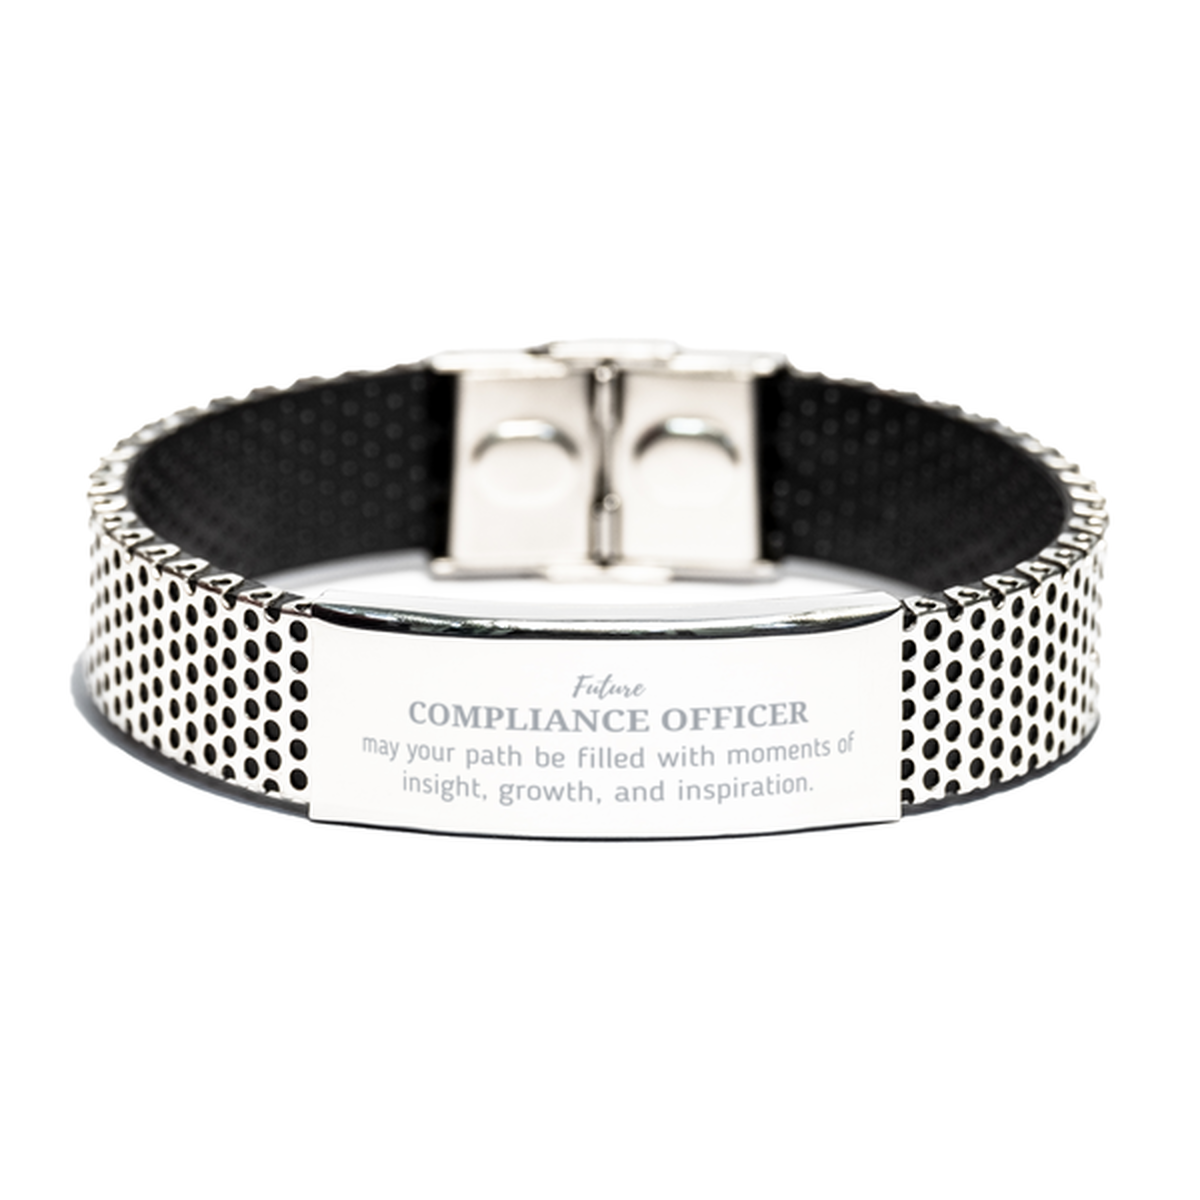 Future Compliance Officer Gifts, May your path be filled with moments of insight, Graduation Gifts for New Compliance Officer, Christmas Unique Stainless Steel Bracelet For Men, Women, Friends